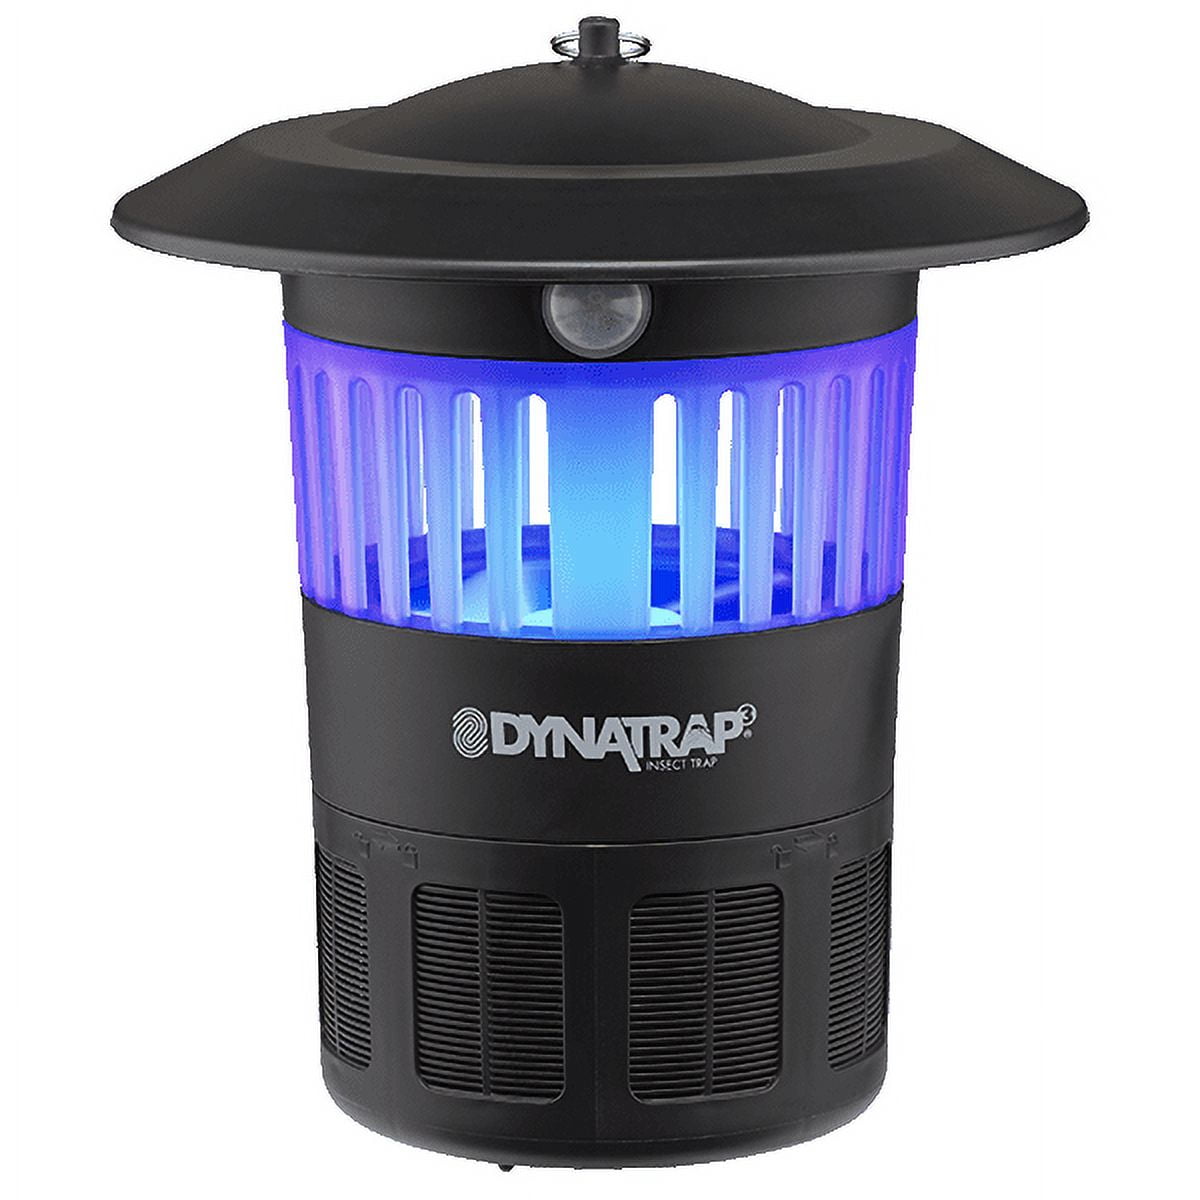 DynaTrap® 3-Way Insect Control  DynaTrap® Mosquito & Insect Trap